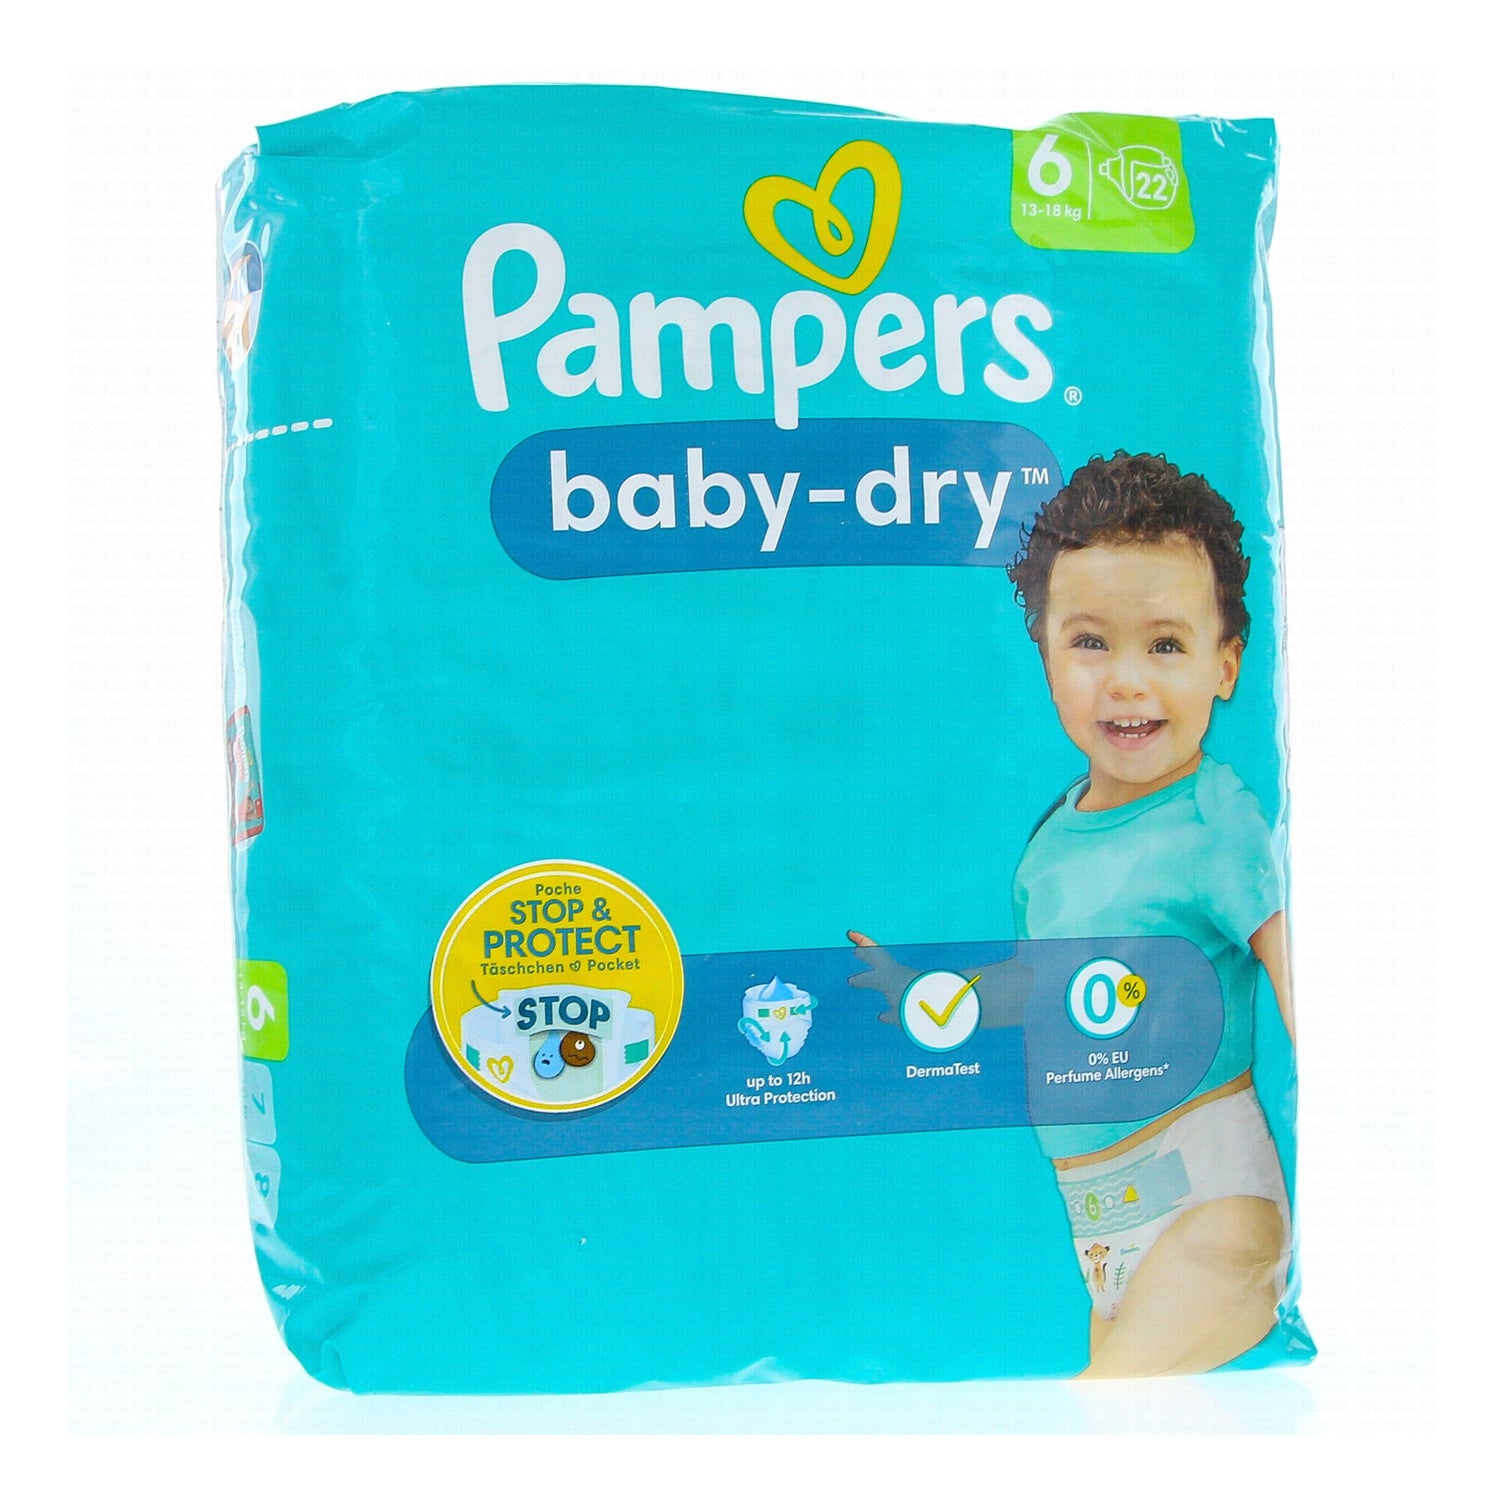 Pampers Baby Dry Pañales 12H Talla 1 21uds